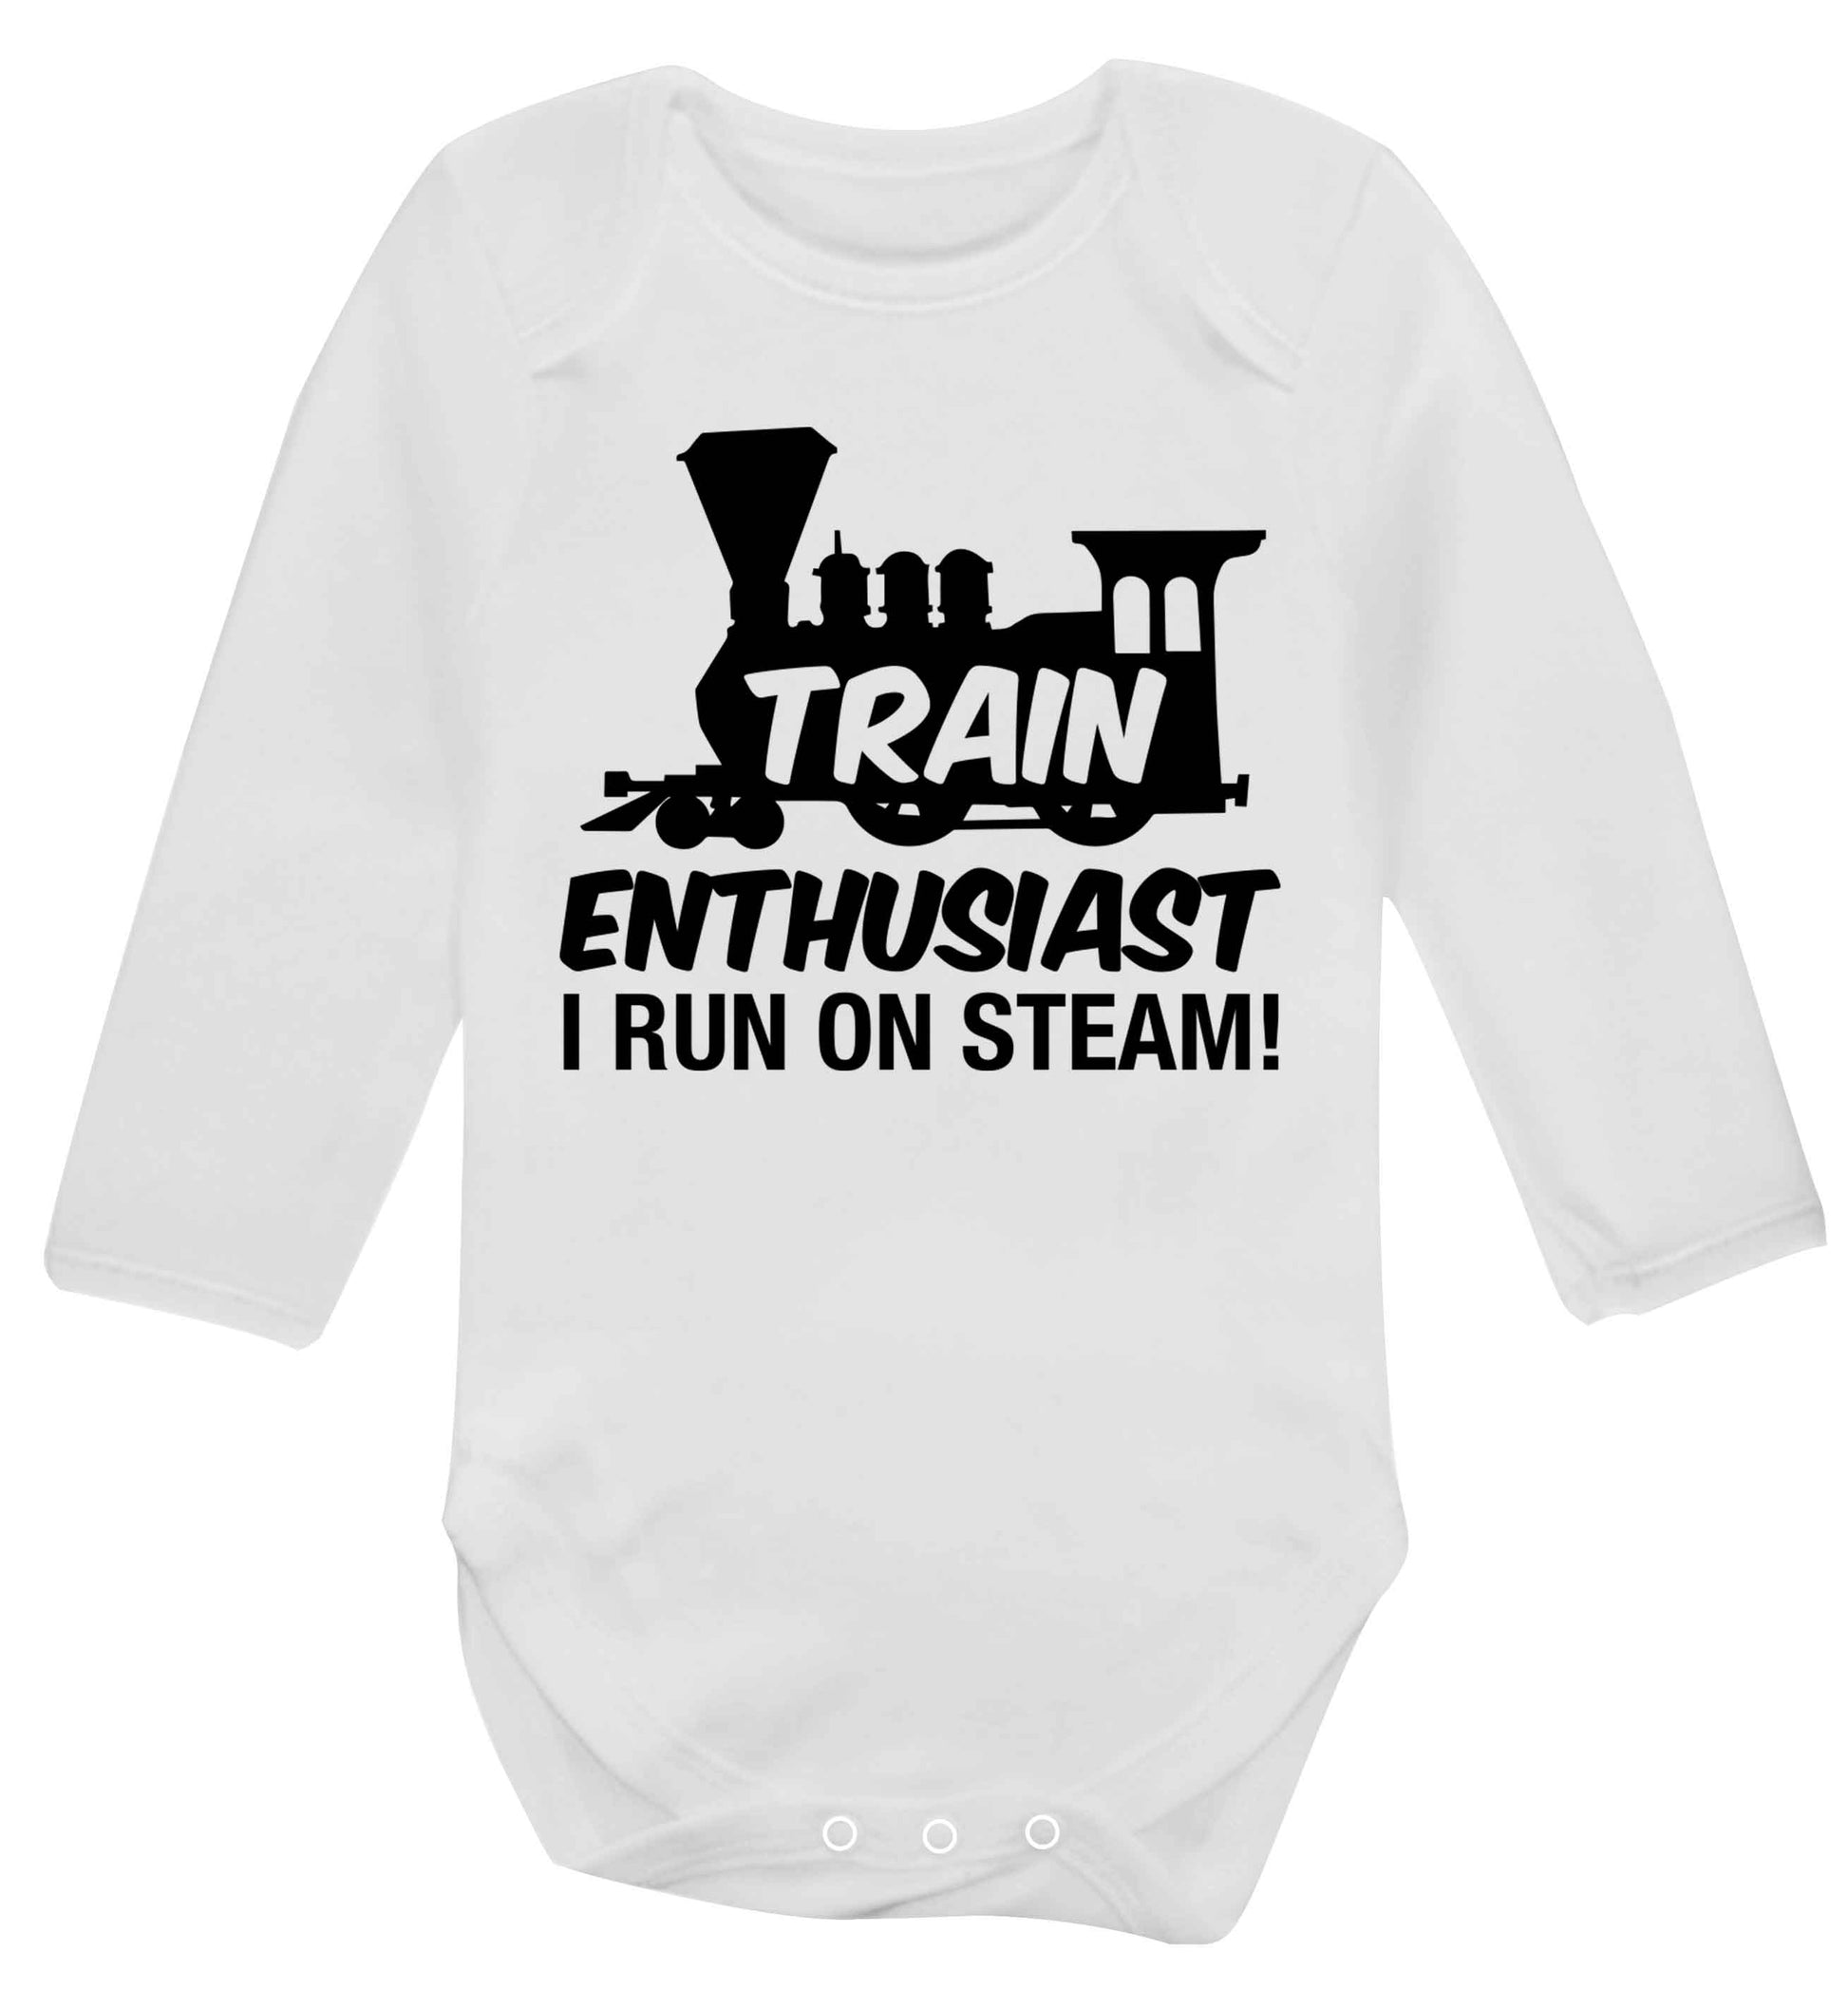 Train enthusiast I run on steam Baby Vest long sleeved white 6-12 months